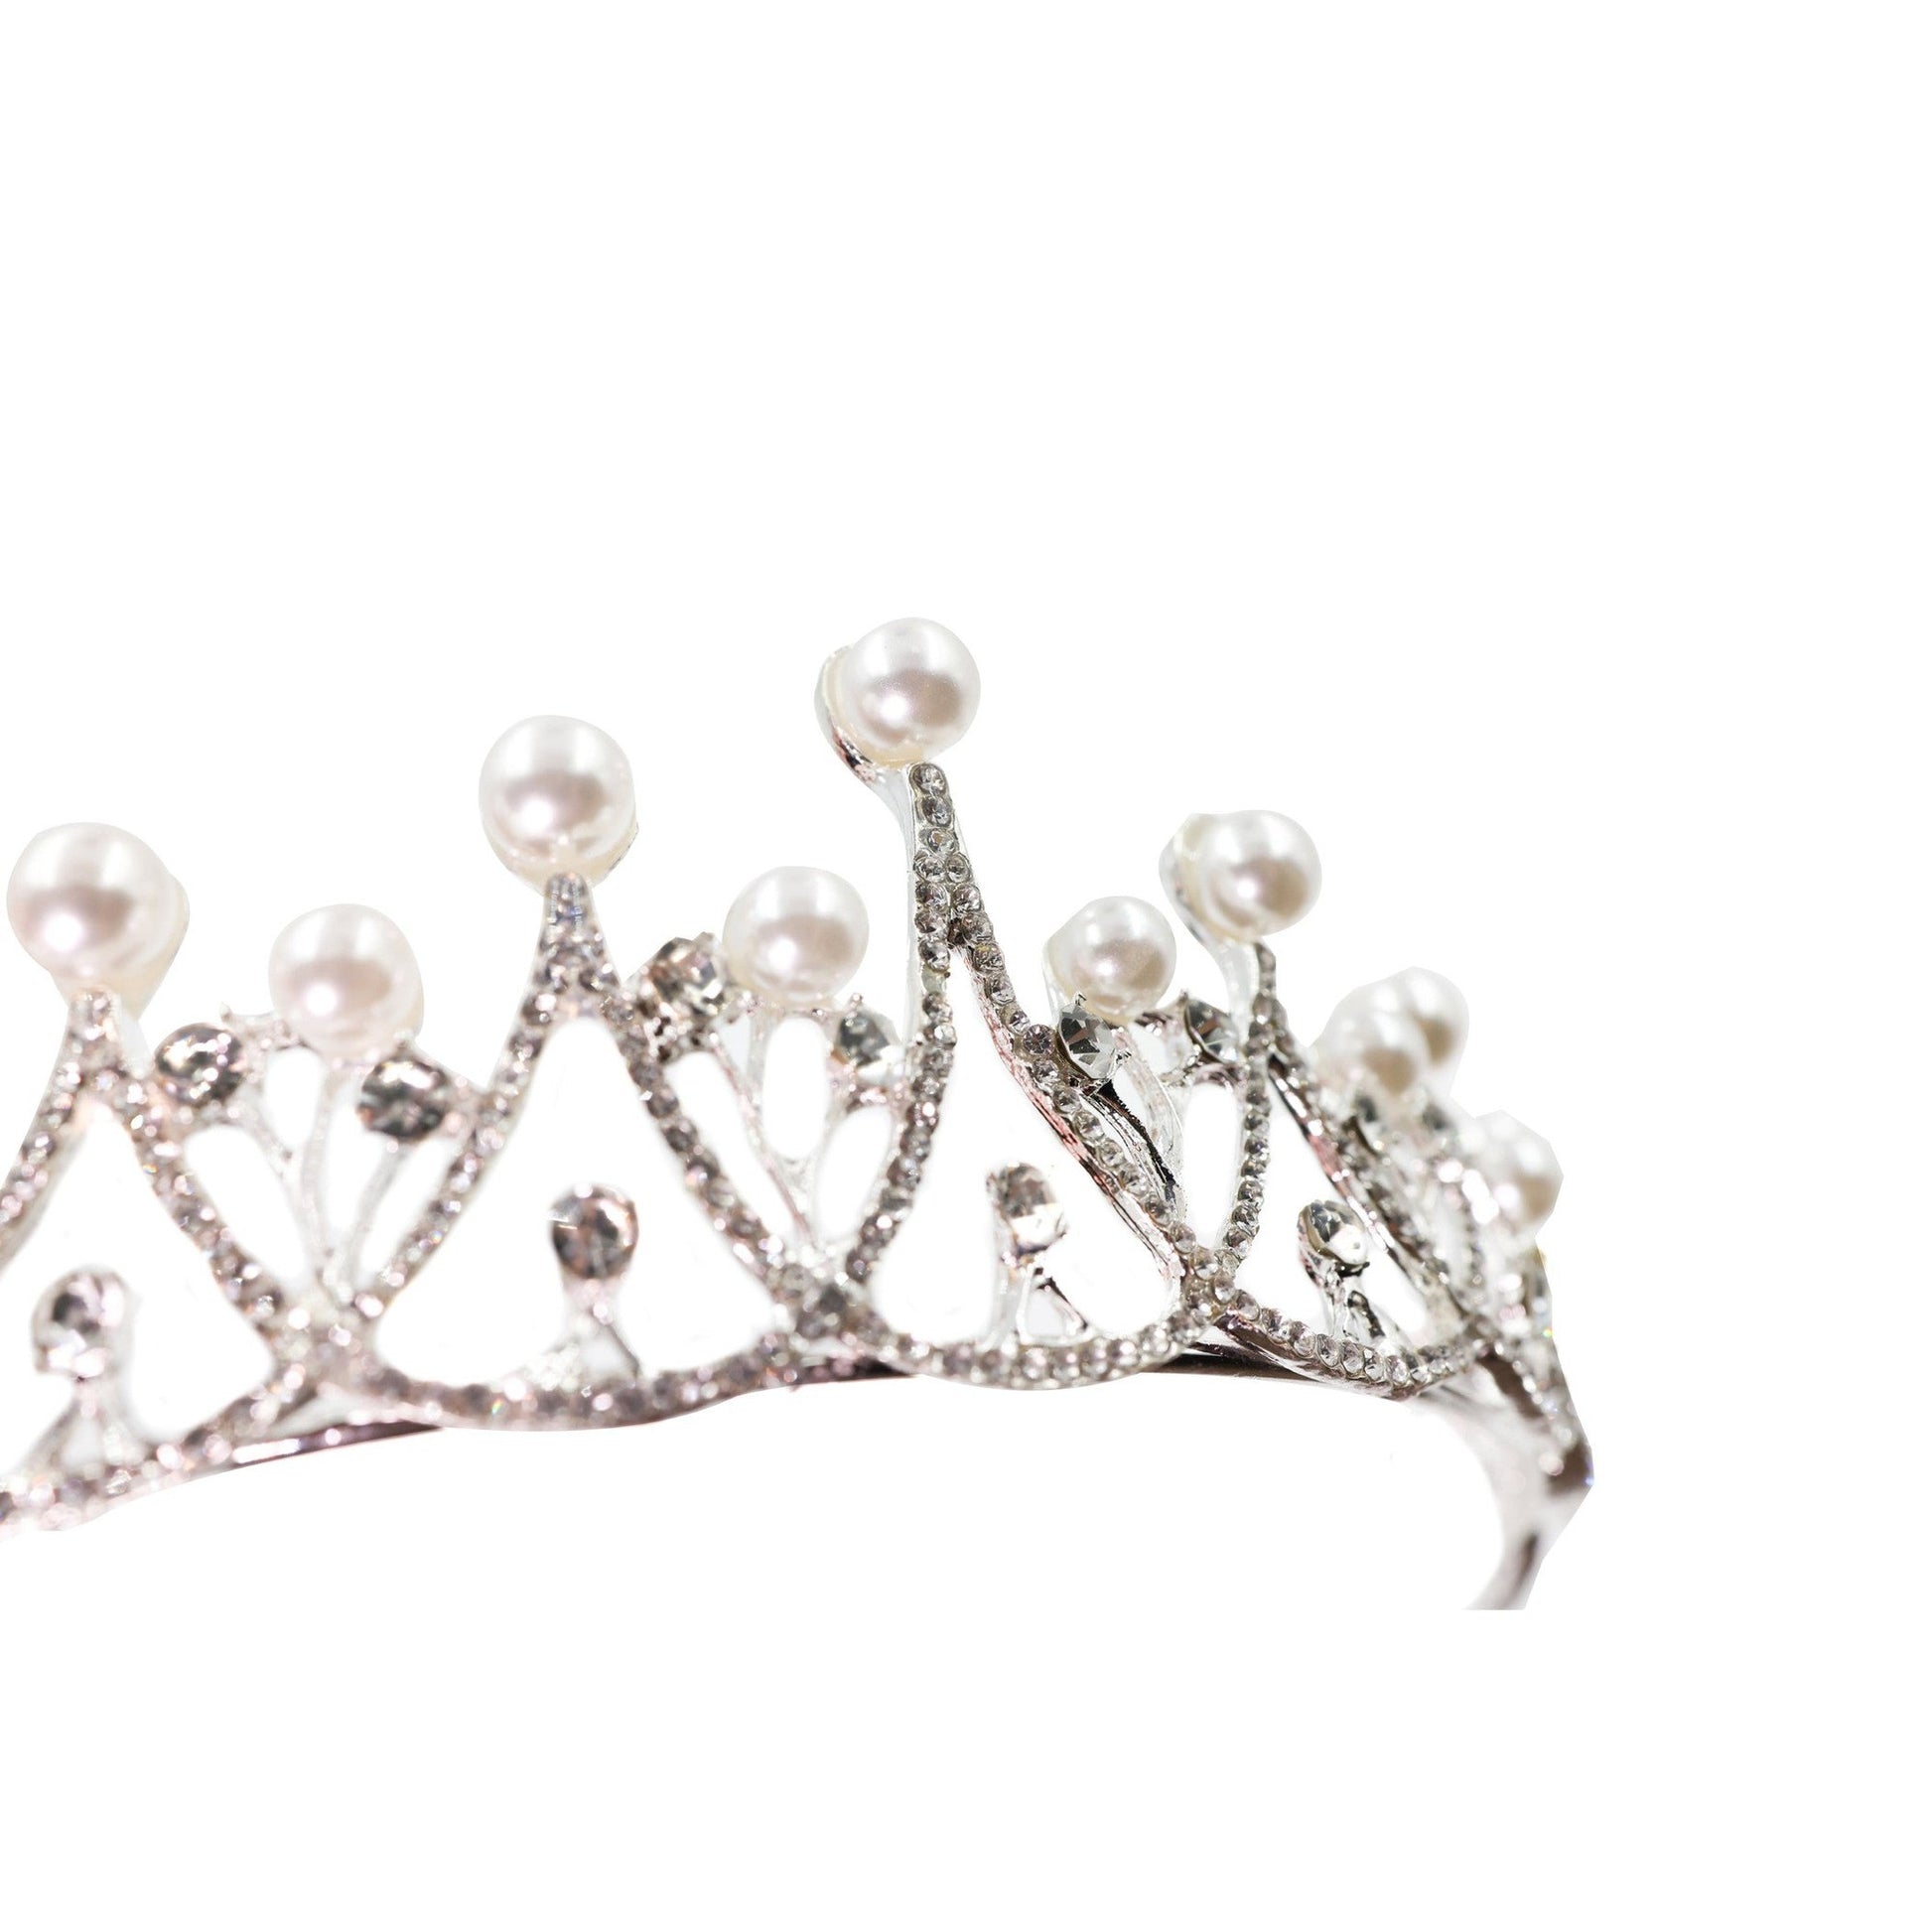 The Age of Pearls Crown Tiara in Silver | Royalty Crown Party or Bridal Hair Accessory